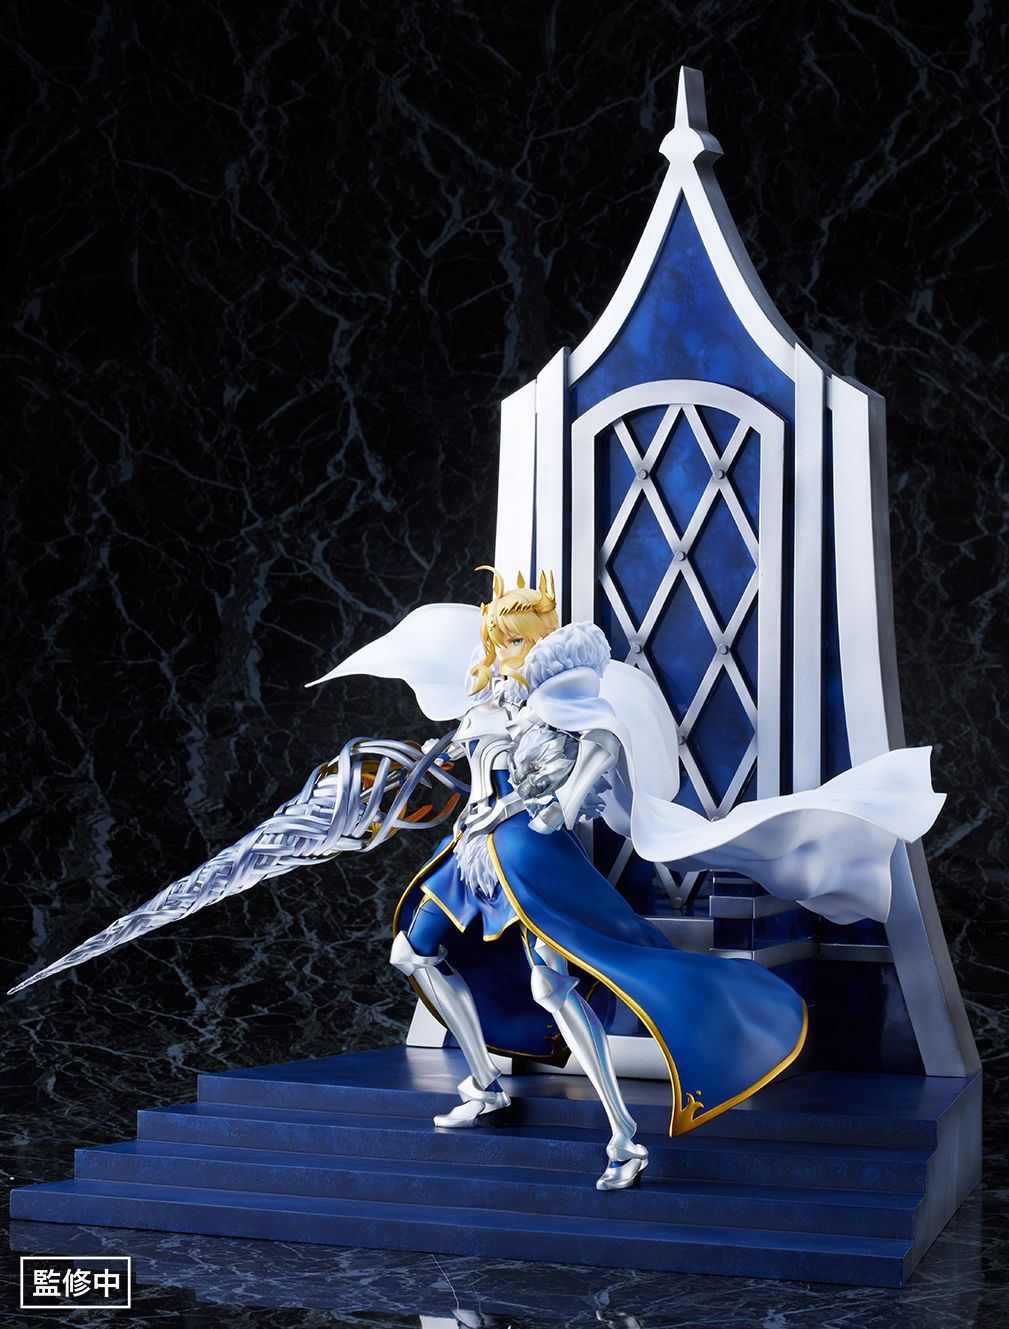 THE LION KING 1/7 Scale Figure Fate/Grand Order THE MOVIE Divine Realm of the Round Table: Camelot SHIBUYA SCRANBLE FIGURE